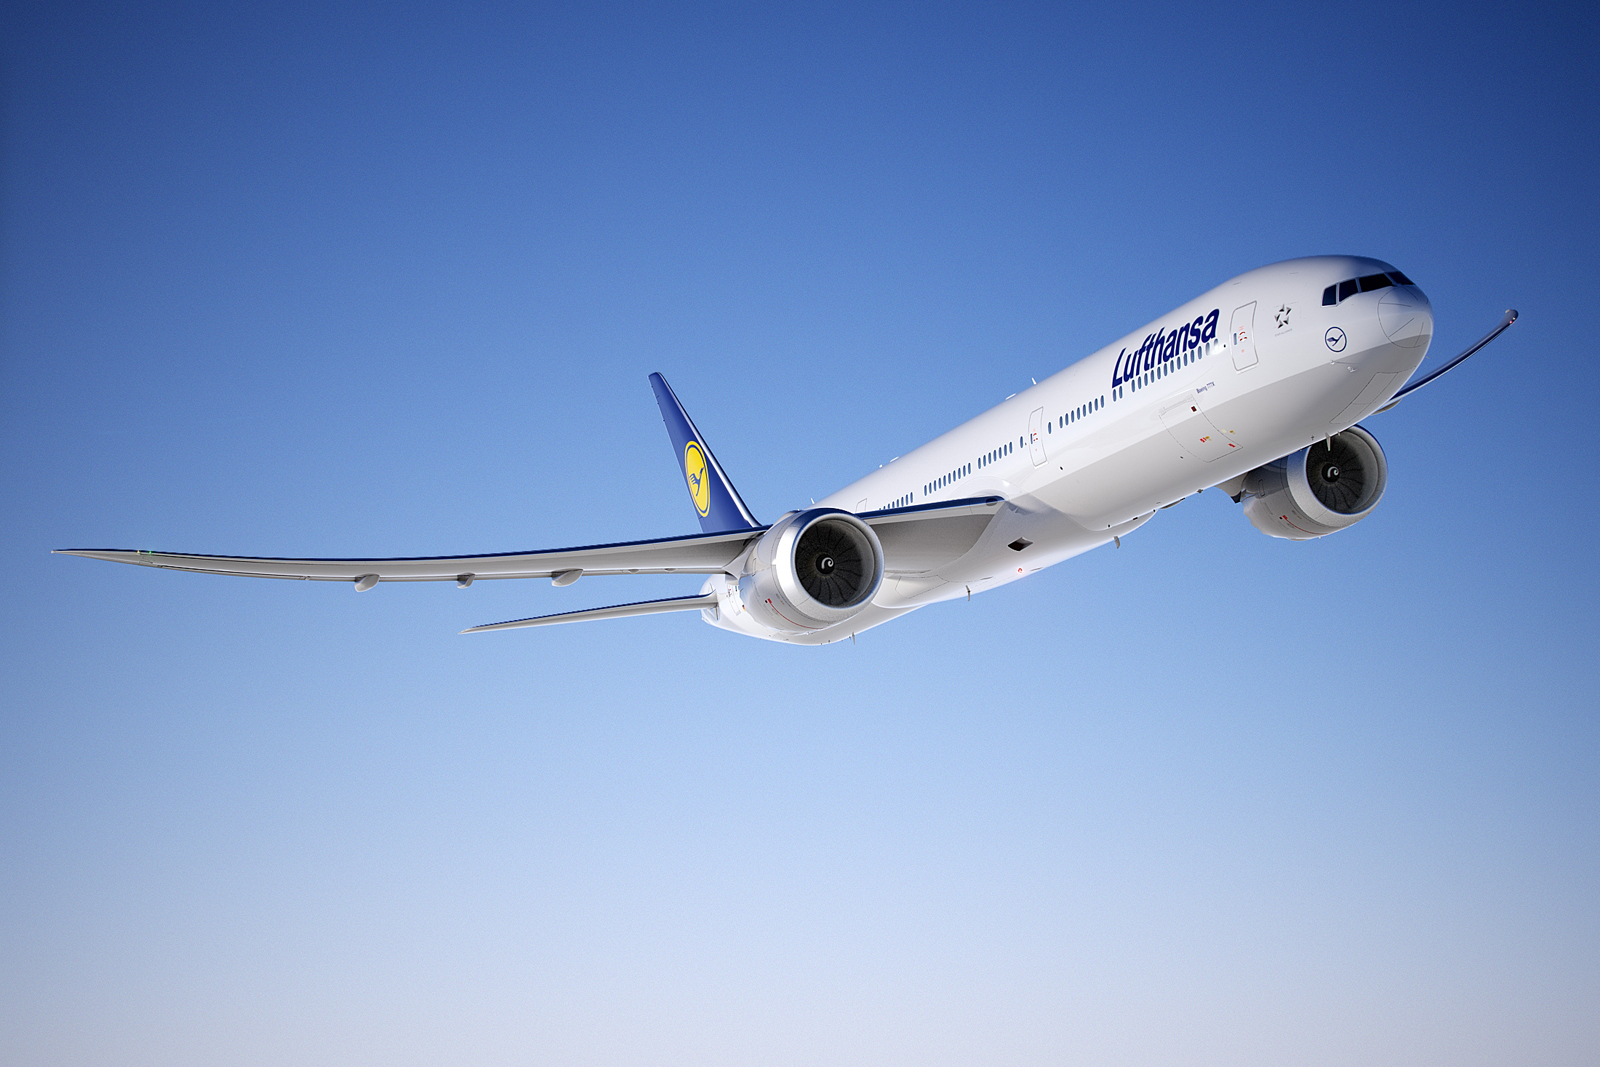 Lufthansa $19 billion order launches Boeing 777-9X. Carrier also orders 25 Airbus A350-900 ...